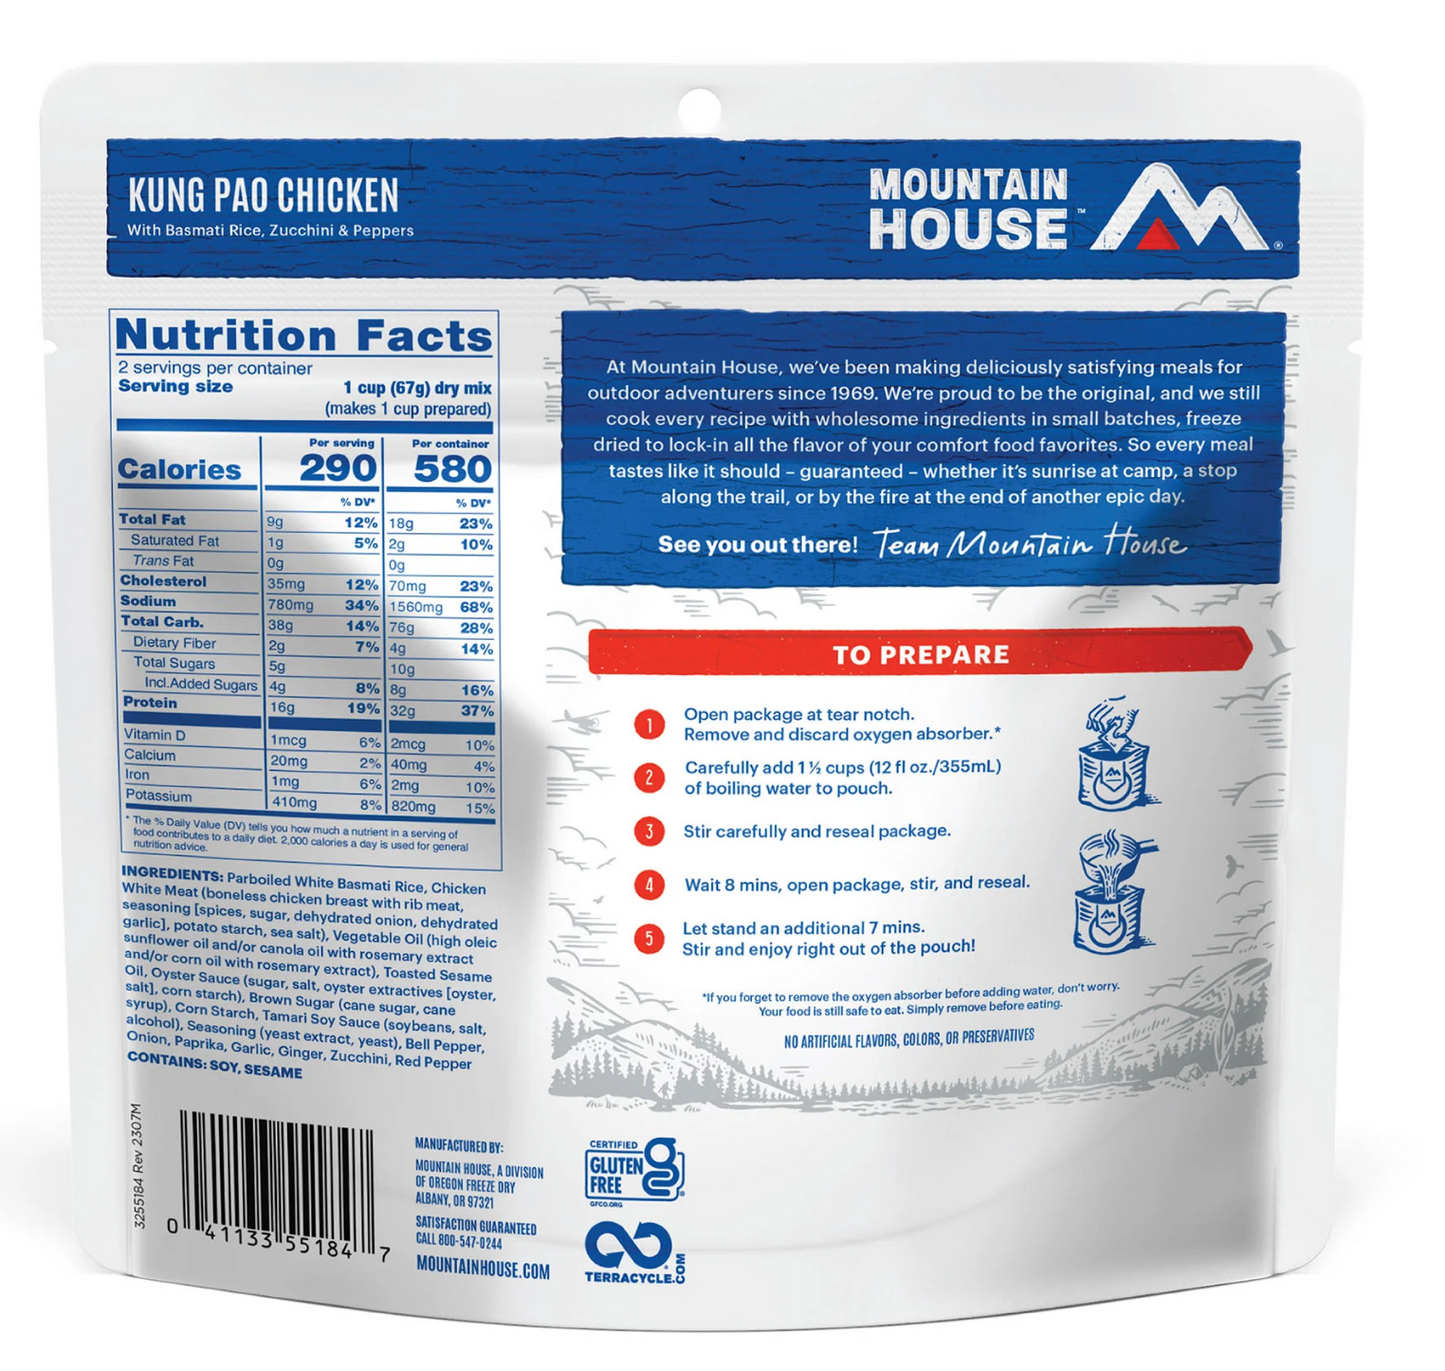 Freeze-Dried Kung Pao Chicken Pouch - Mountain House